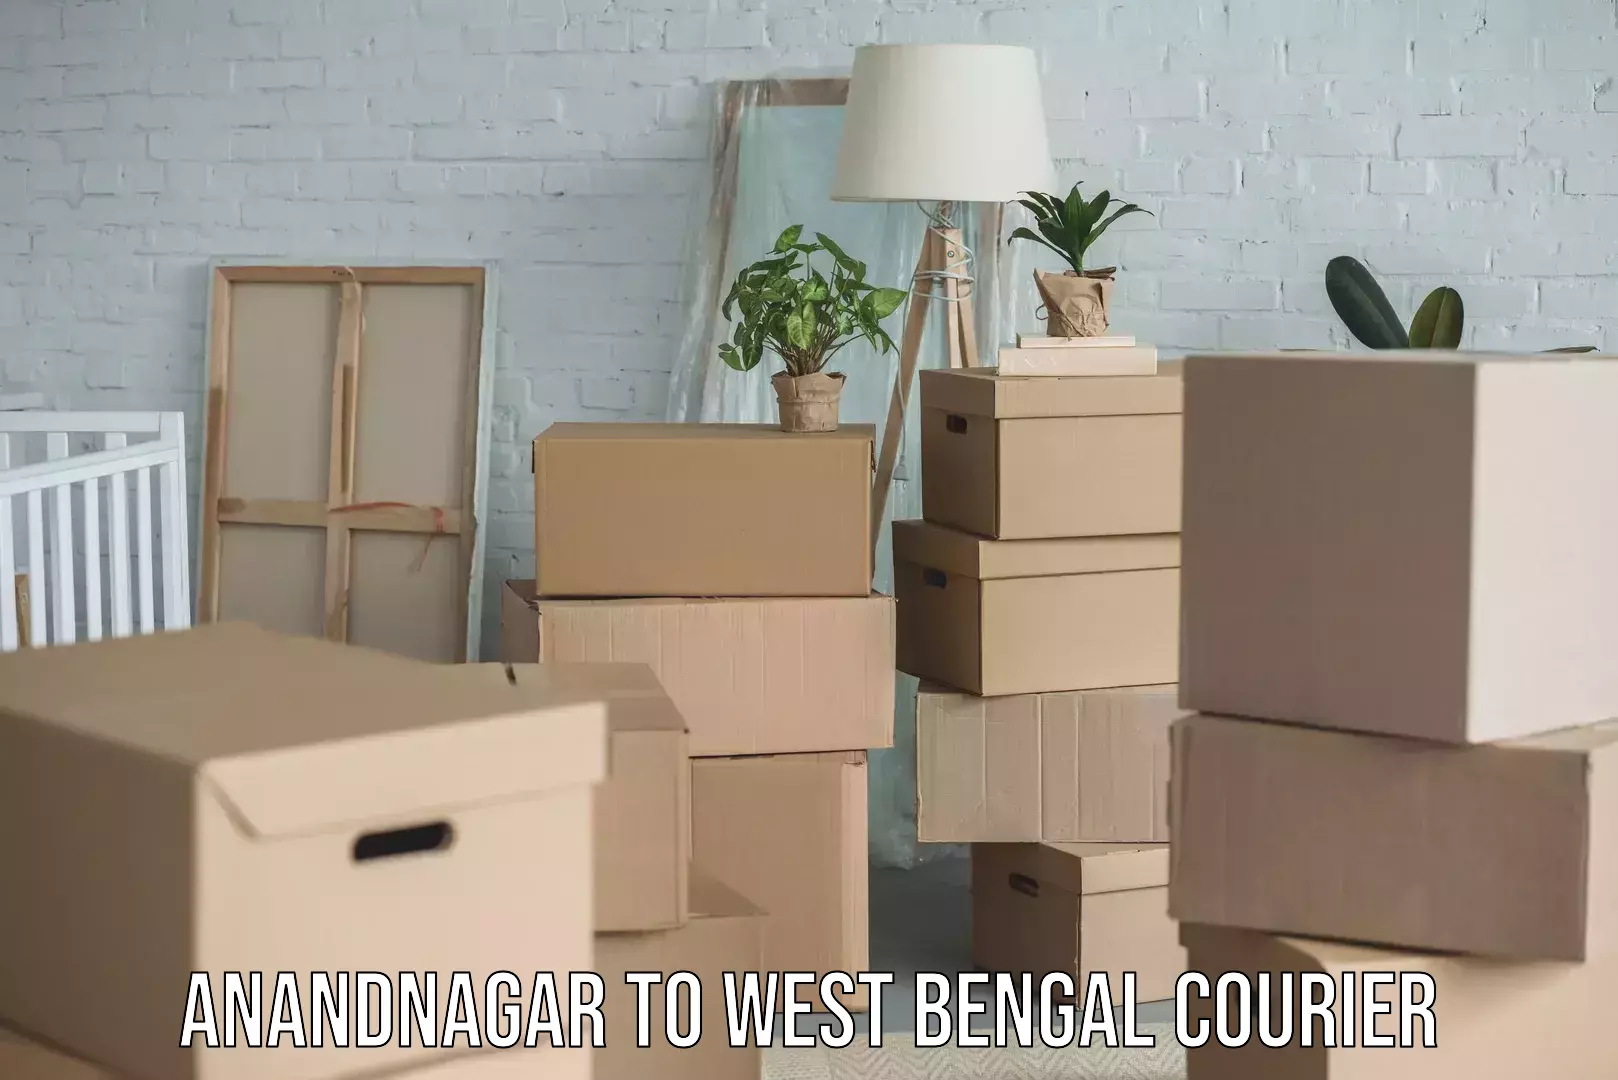 Individual parcel service Anandnagar to West Bengal